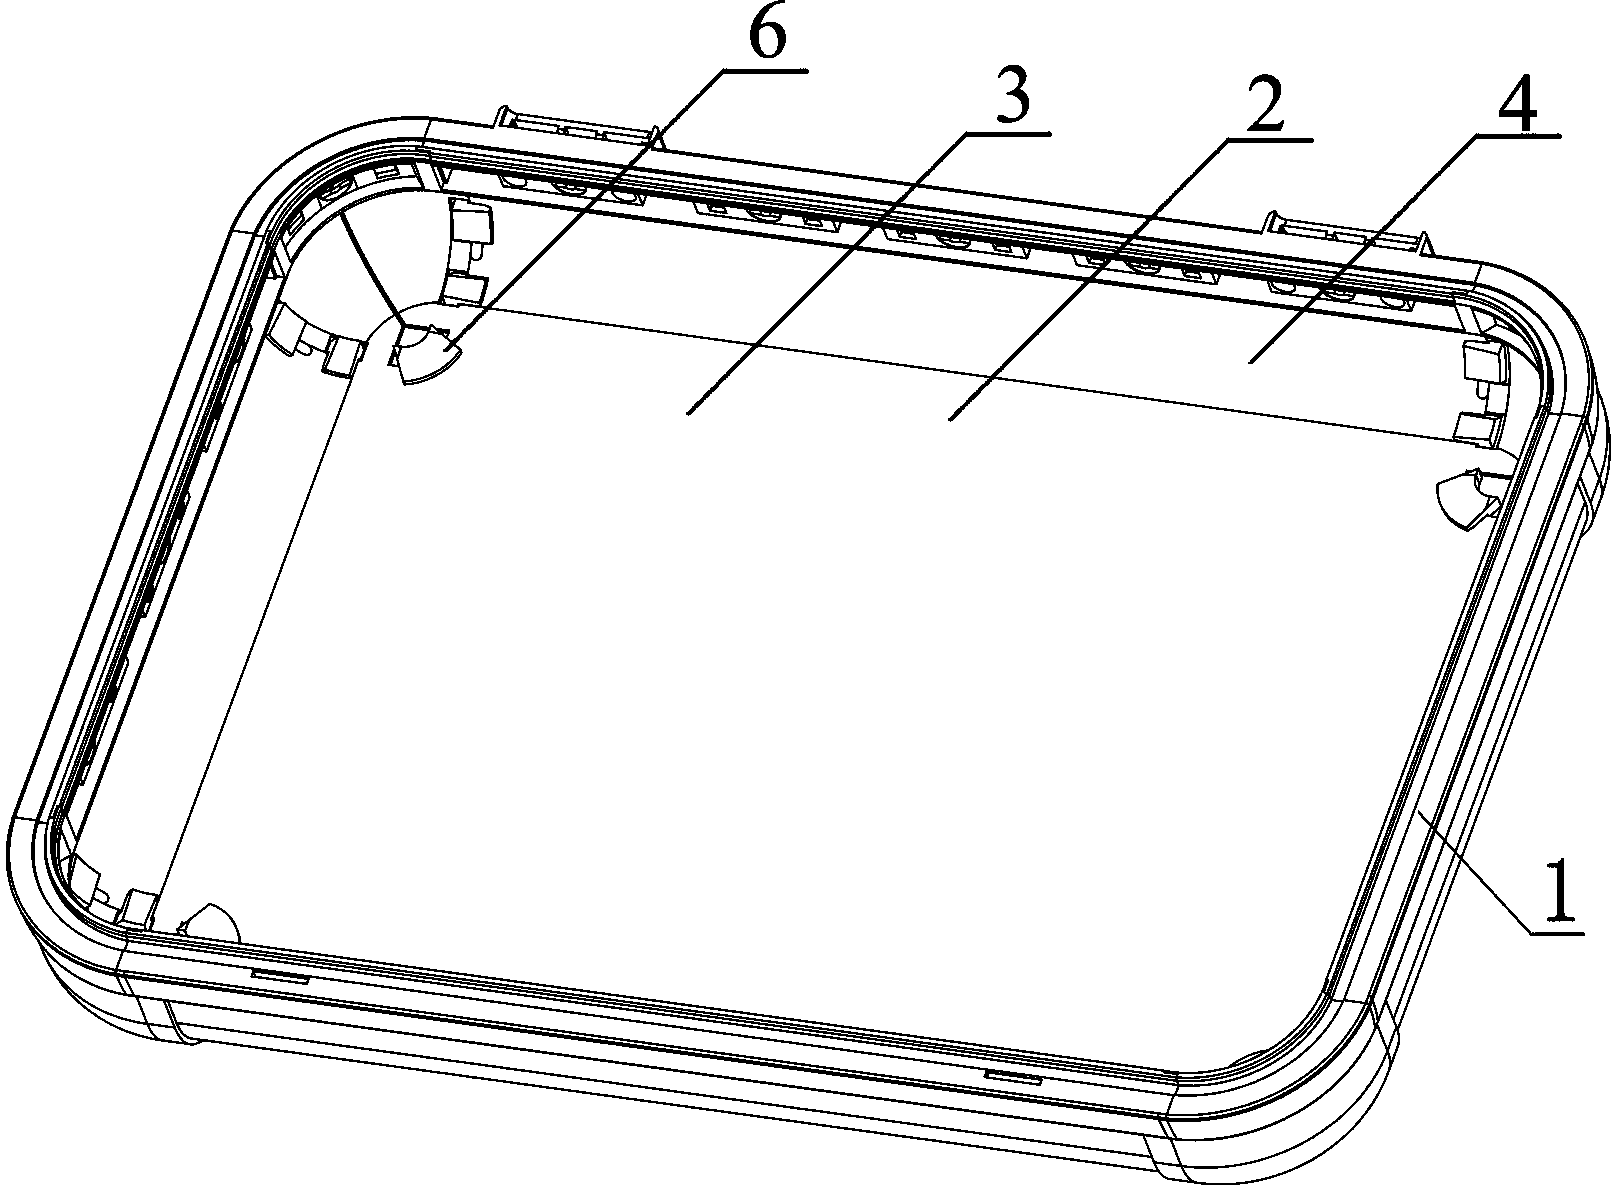 Hard suitcase and manufacturing method thereof